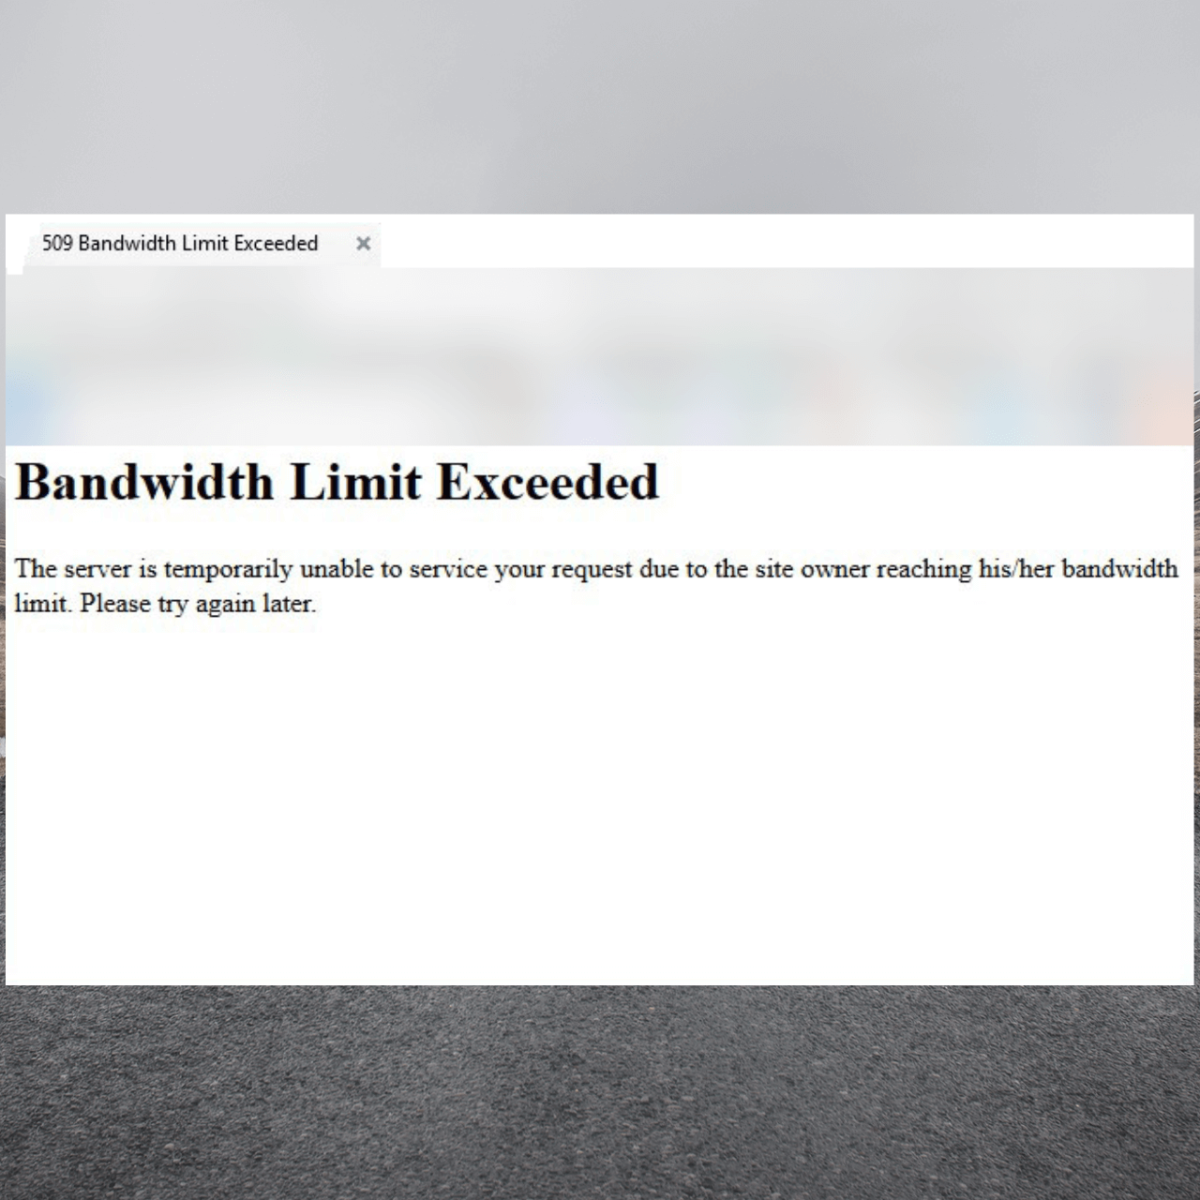 How To Fix the 509 Bandwidth Limit Exceeded Error